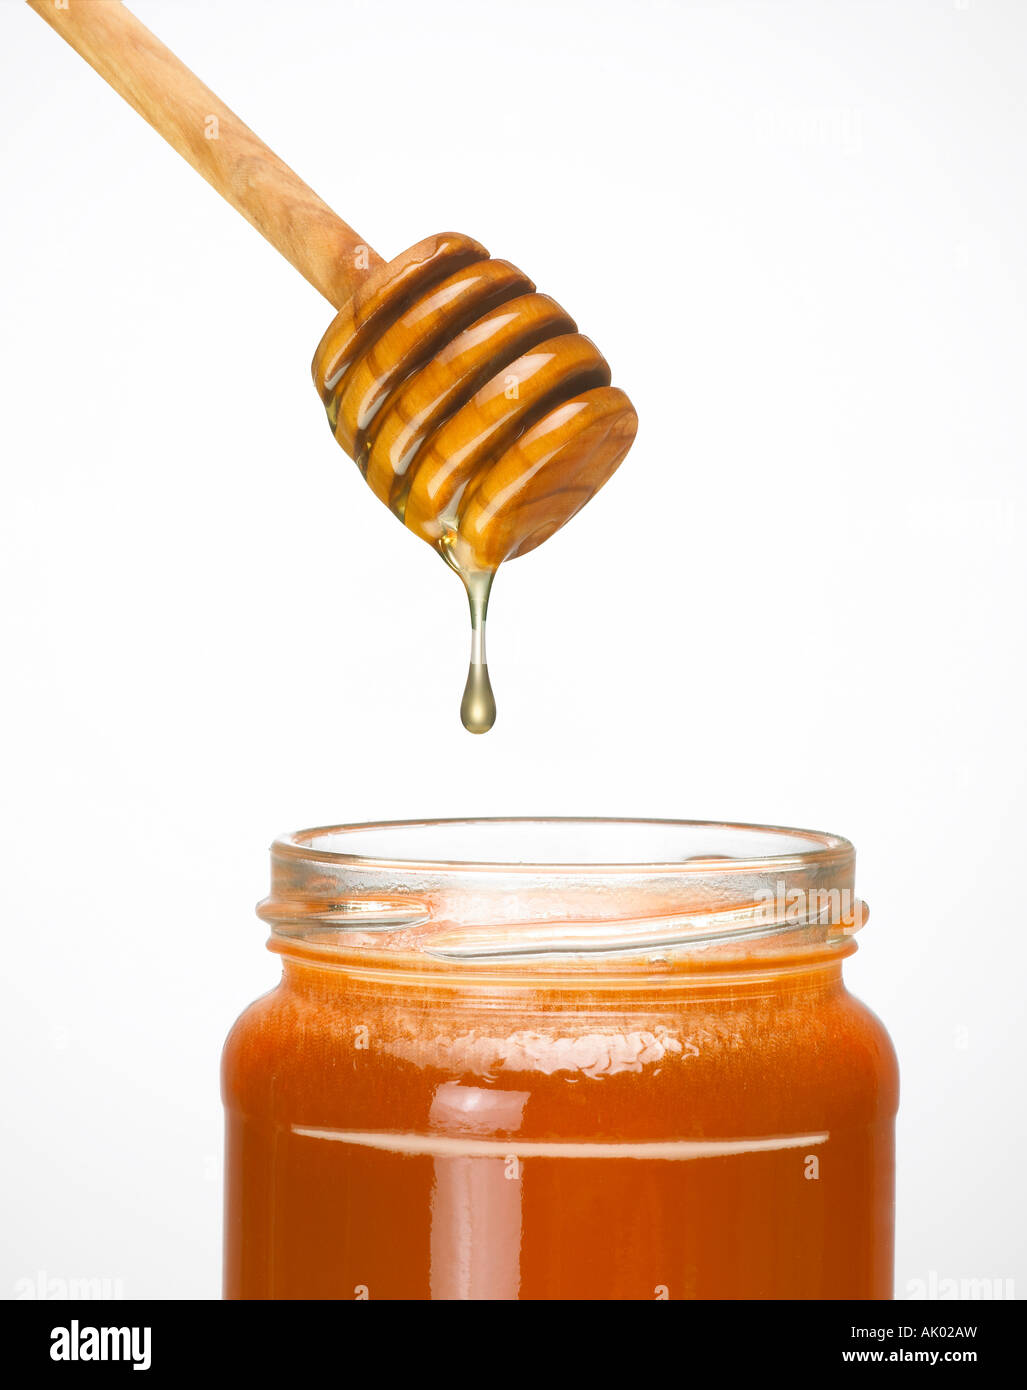 HONEY DRIPPING FROM WOODEN HONEY DRIPPER INTO GLASS JAR OF HONEY Stock Photo